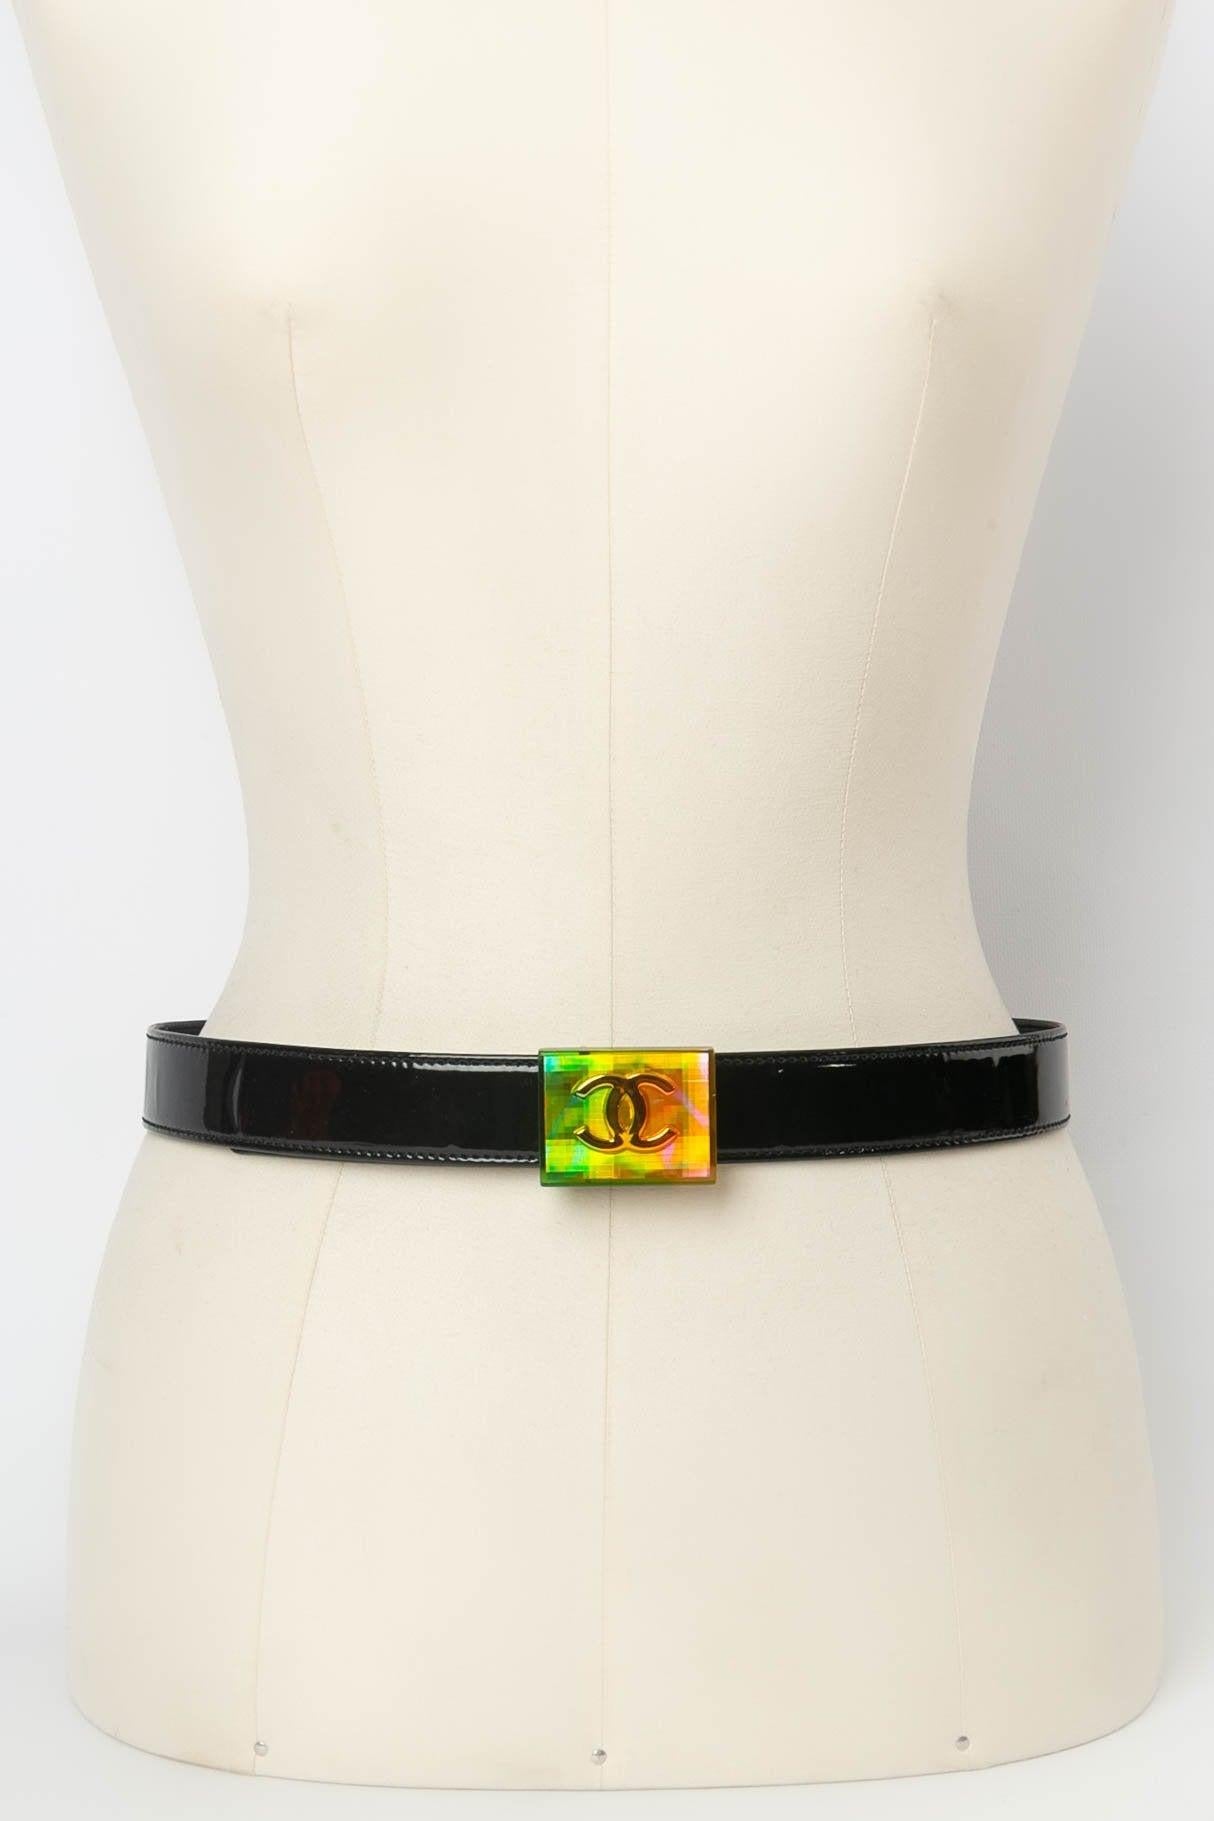 Chanel (Made in France) Black leather and gilded metal belt, decorated with an holographic buckle. 1997 Spring-Summer Collection. Indicated size 75/30.

Additional information: 
Dimensions: Length: 73 cm to 77.5 cm (28.74